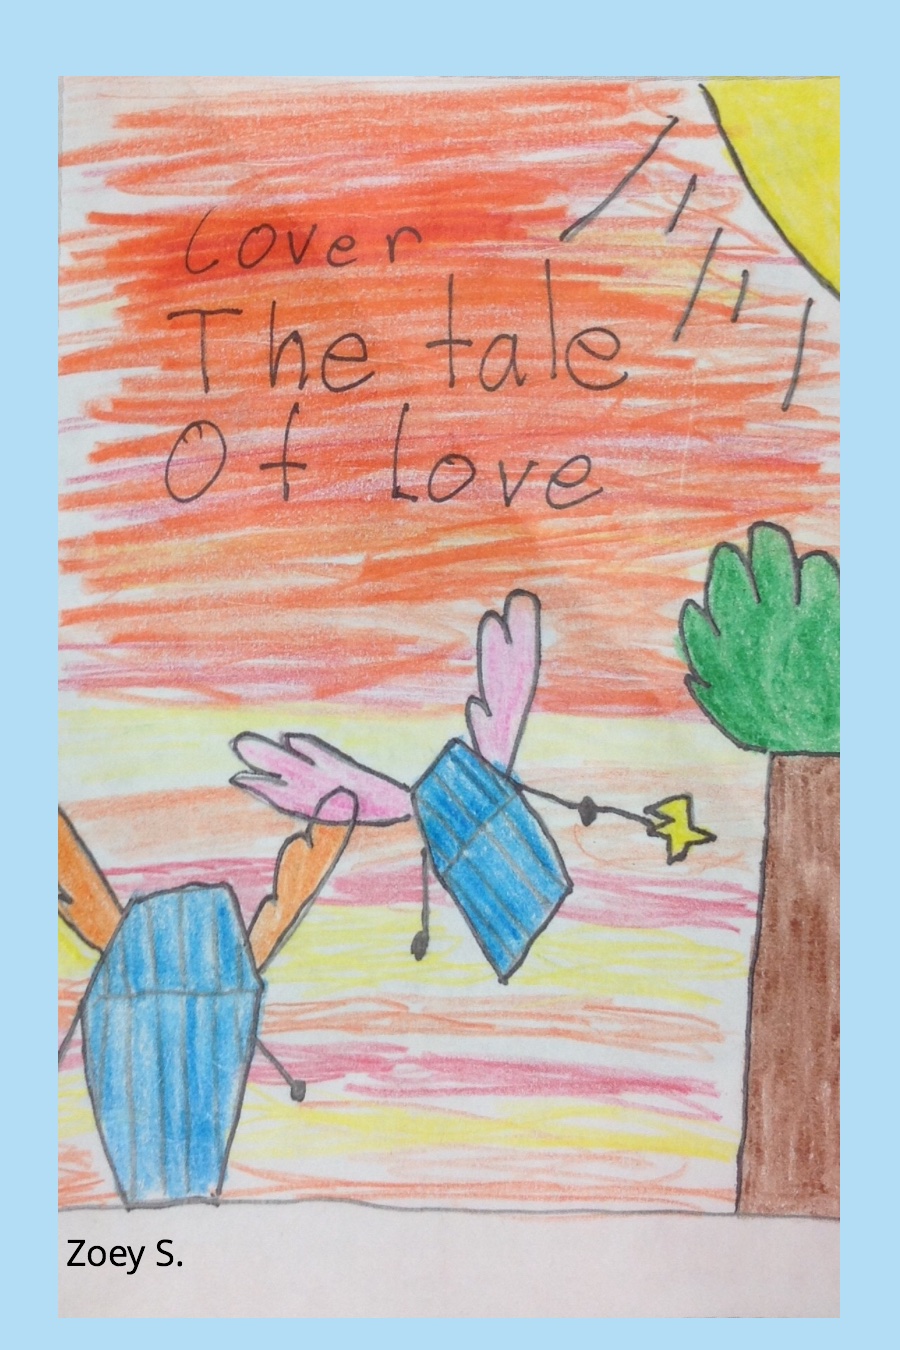 The Tale Of Love by Zoey S